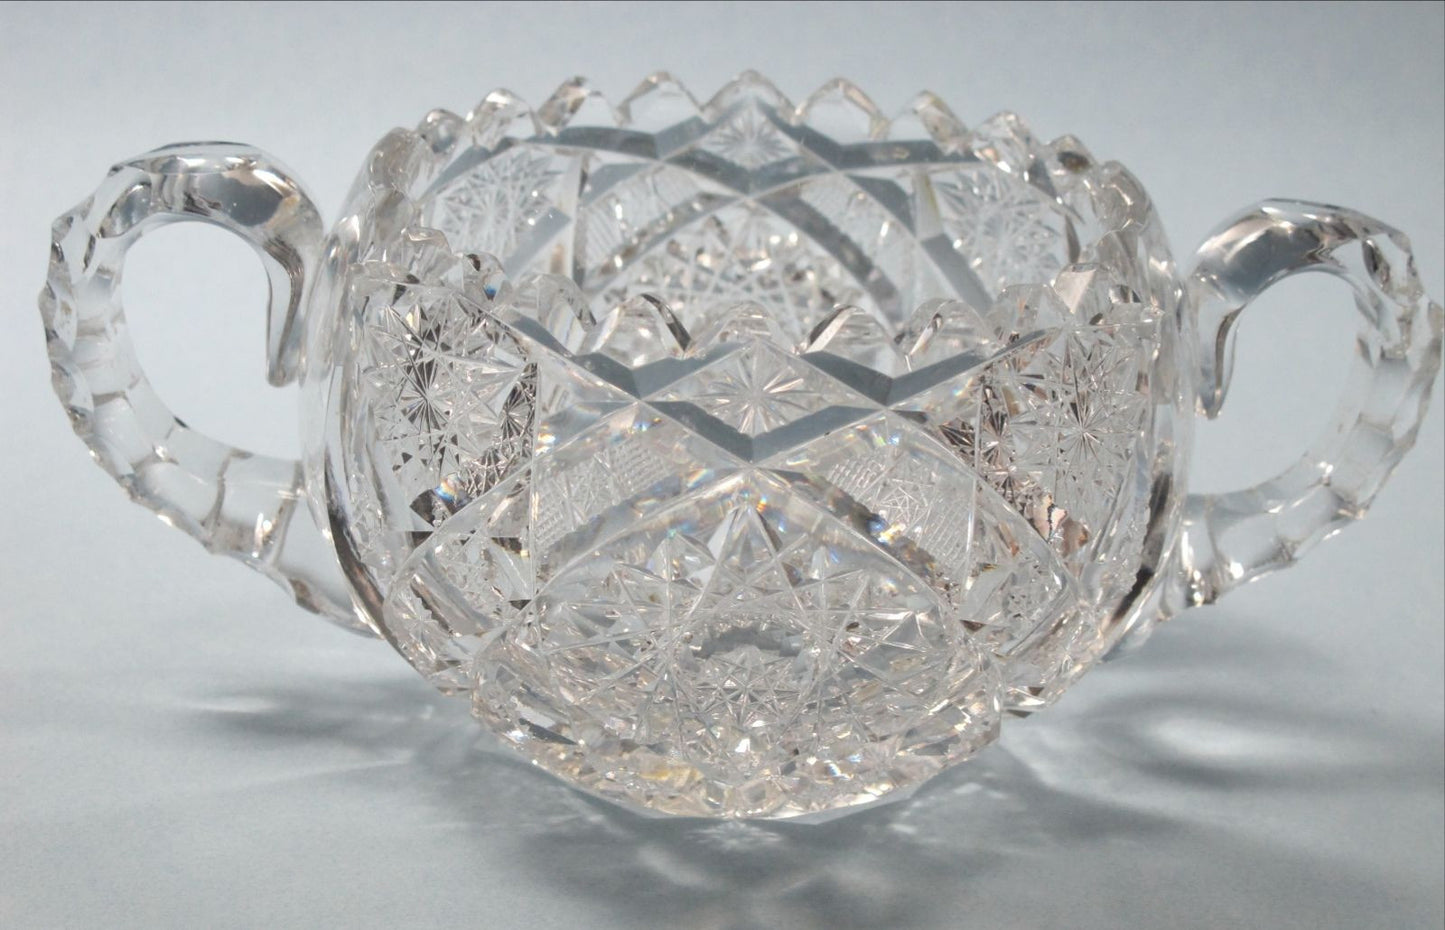 American Brilliant Period Cut Glass 2 handle large sugar Antique  abp hand cut - O'Rourke crystal awards & gifts abp cut glass